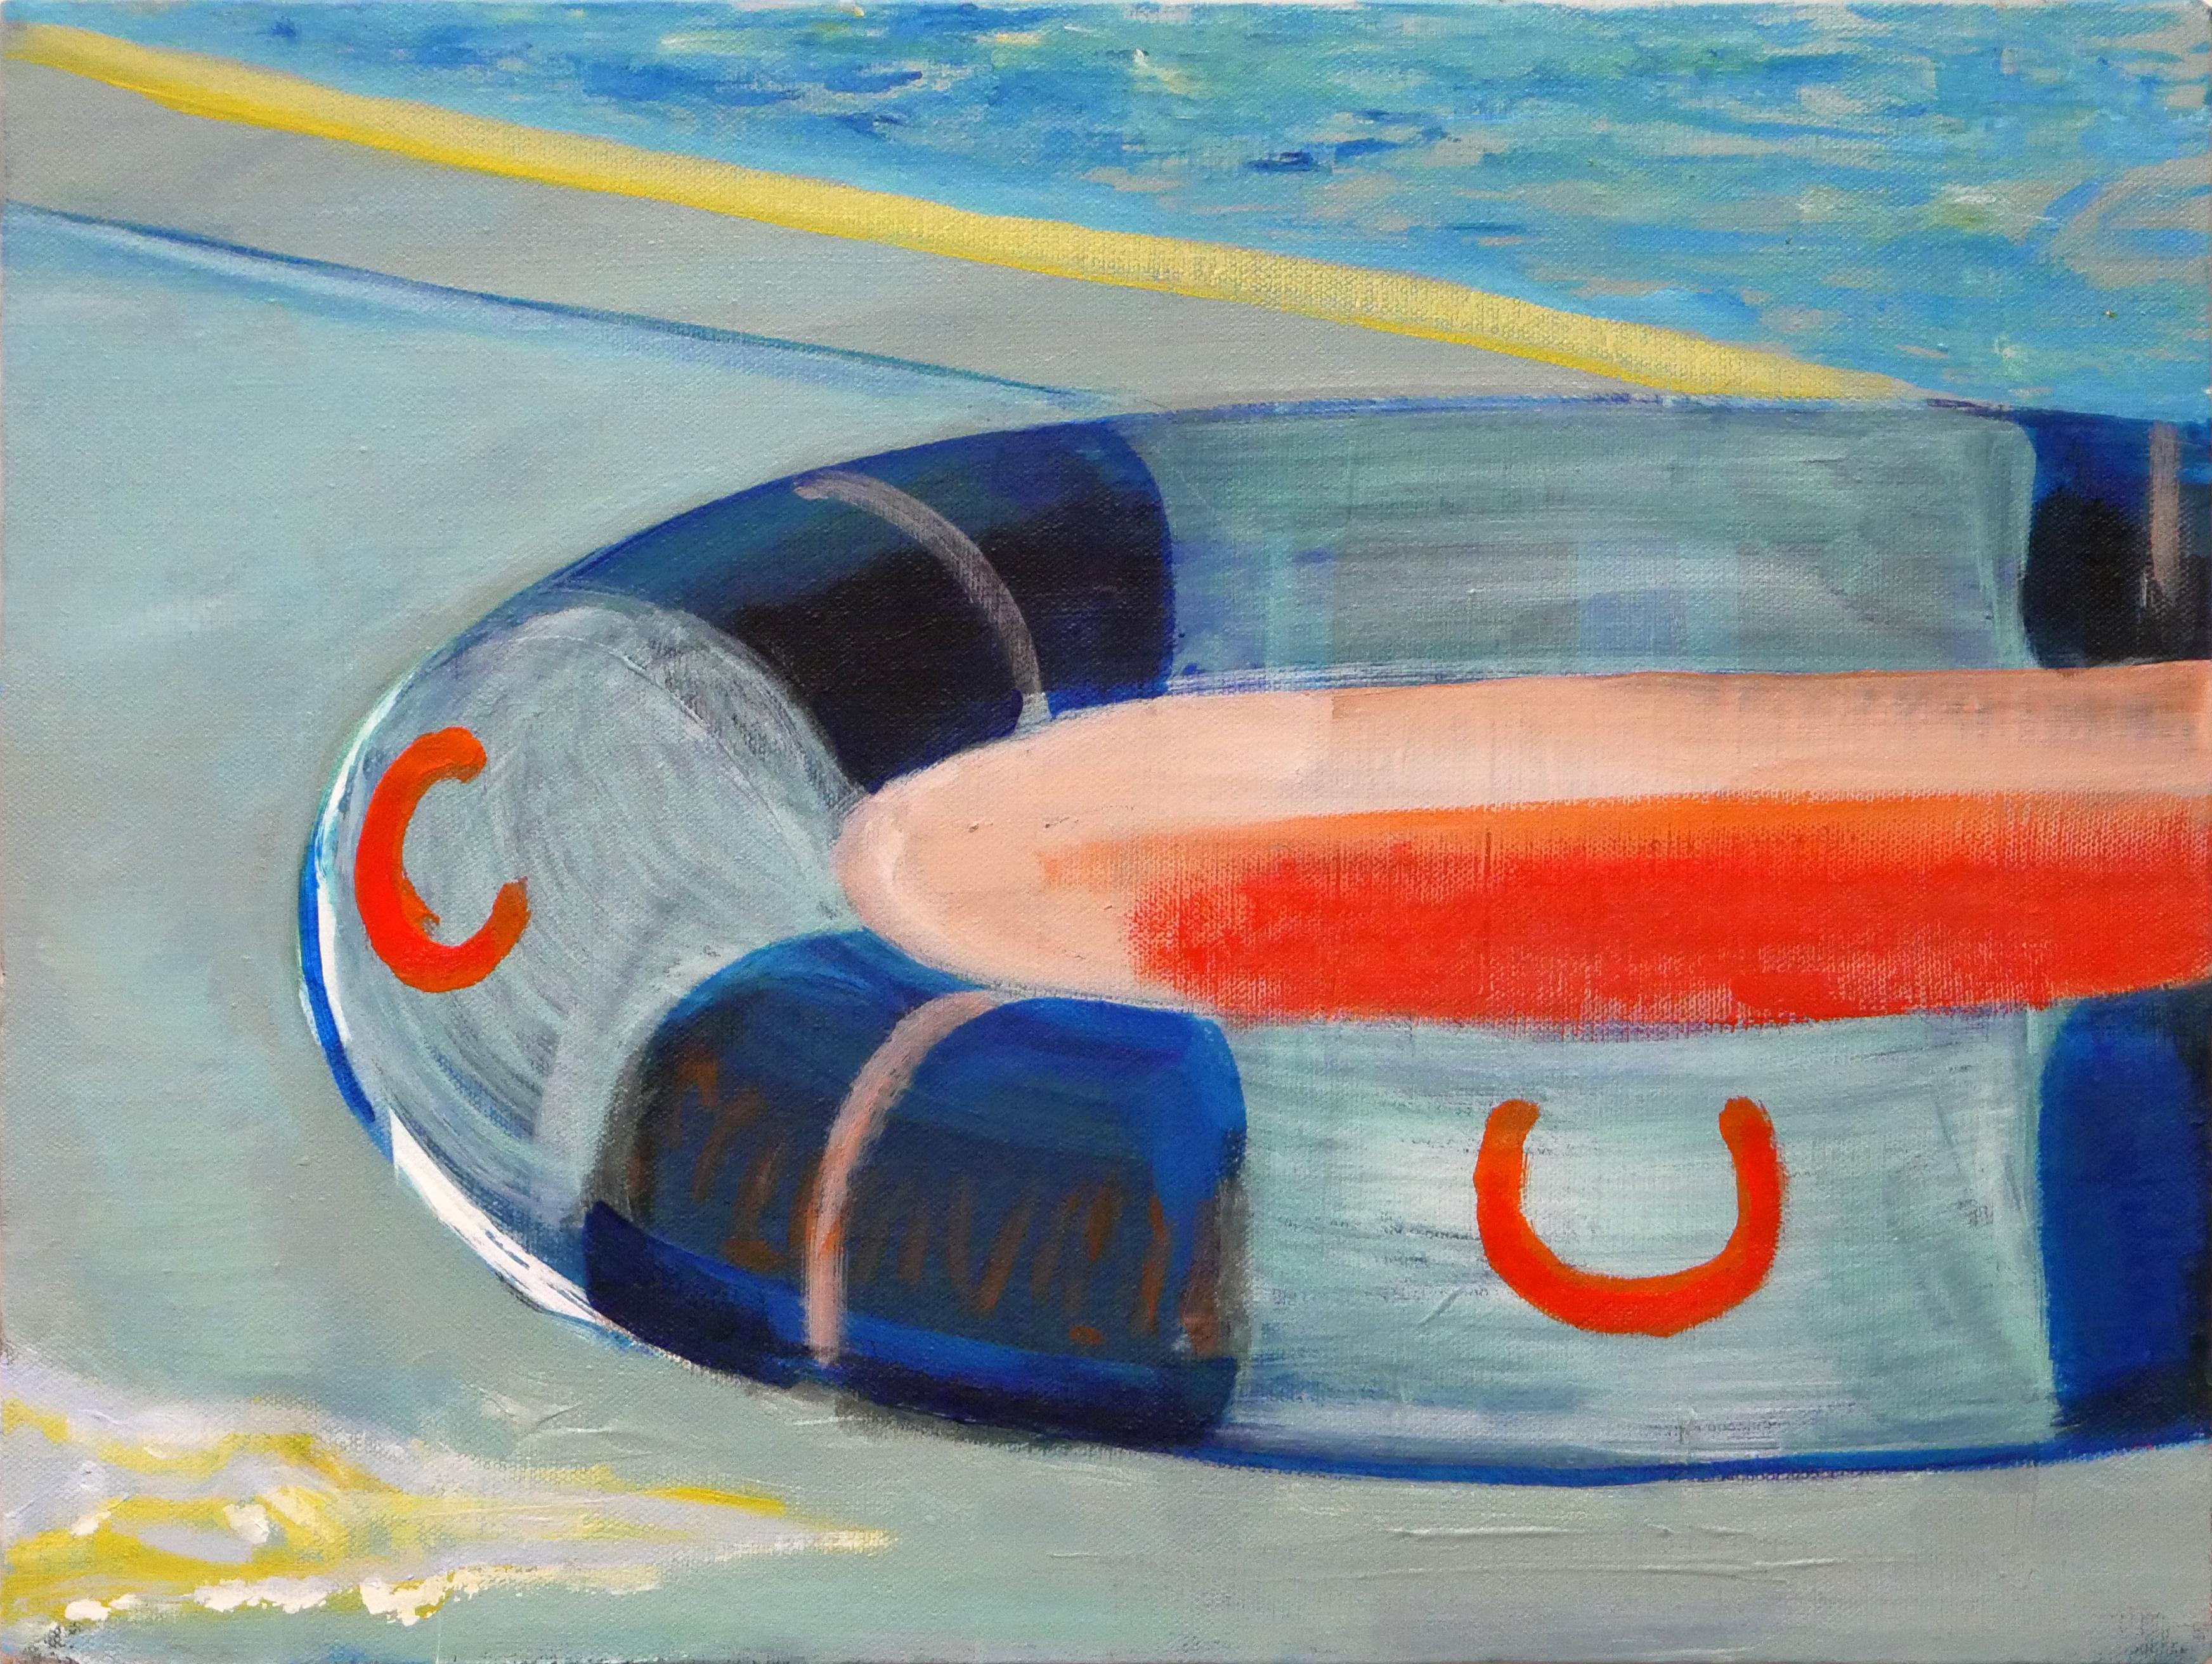 Moisés Villafuerte Abstract Painting - Small Blue and Bright Orange Abstract Contemporary Lifeboat Painting